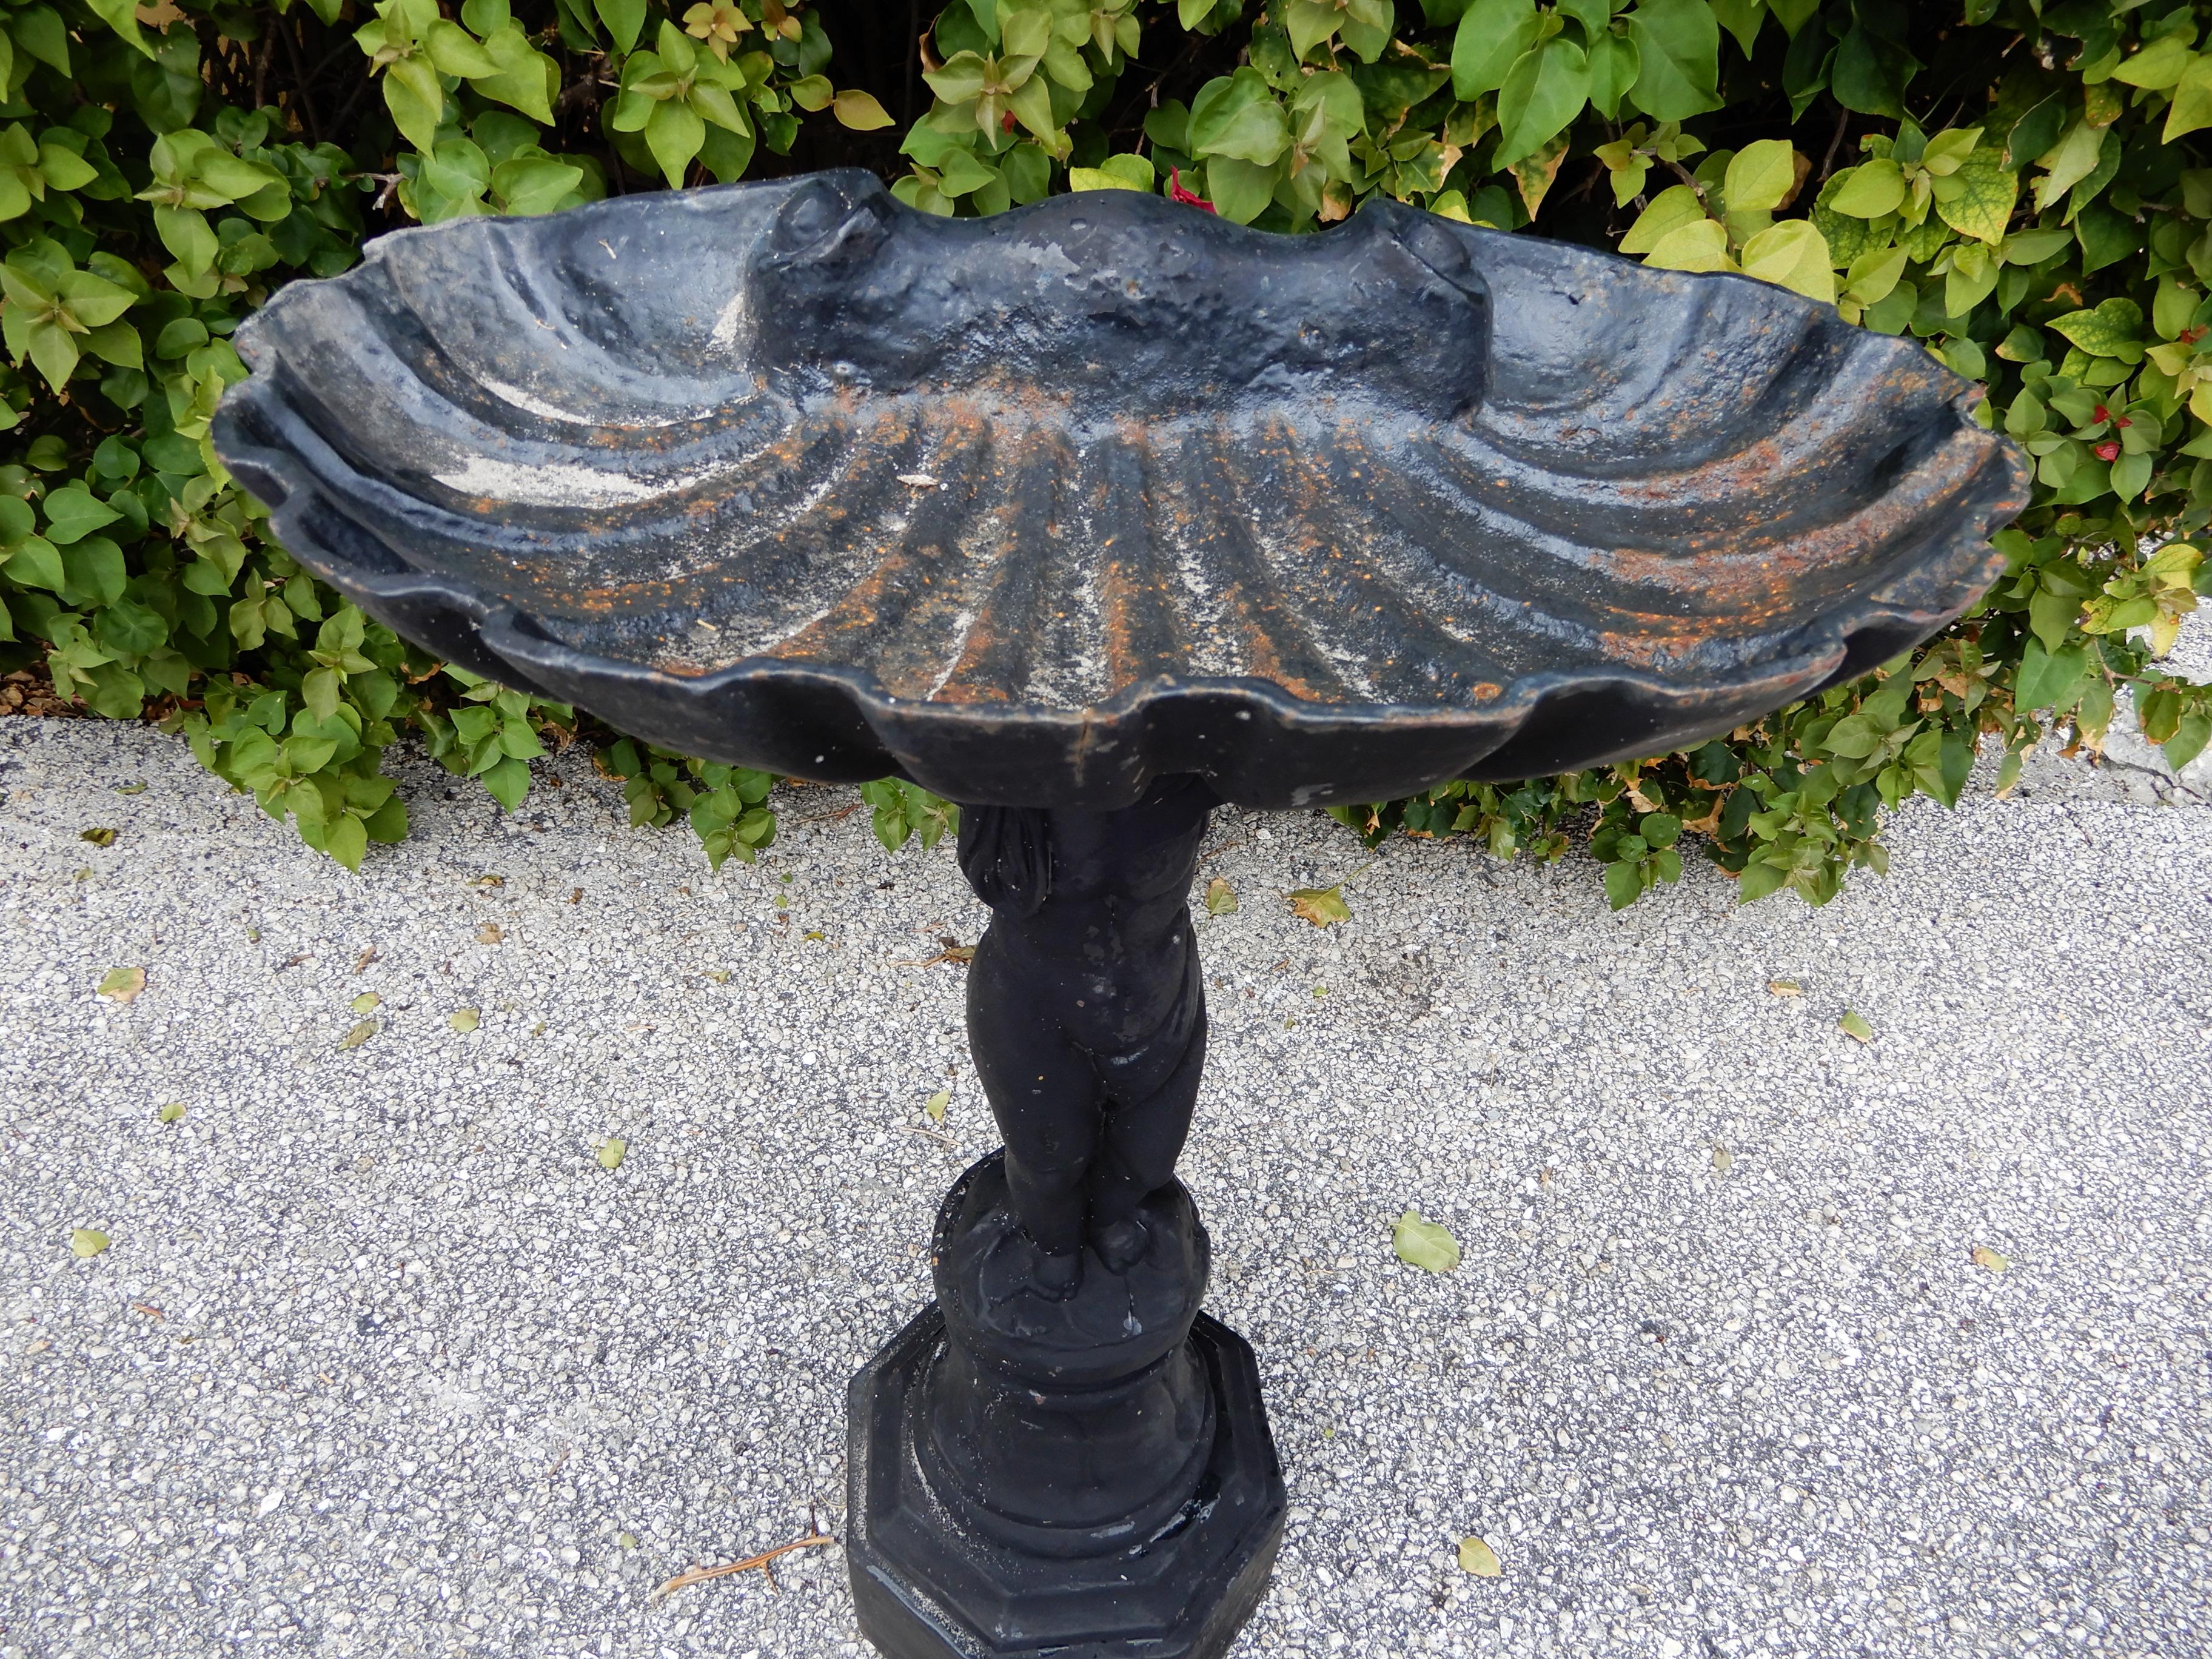 A Victorian cast iron bird bath. The large shell is used to hold the water. The shell is held up by the cherub raised on a platform. The bird bath has an old painted possibly original finish.